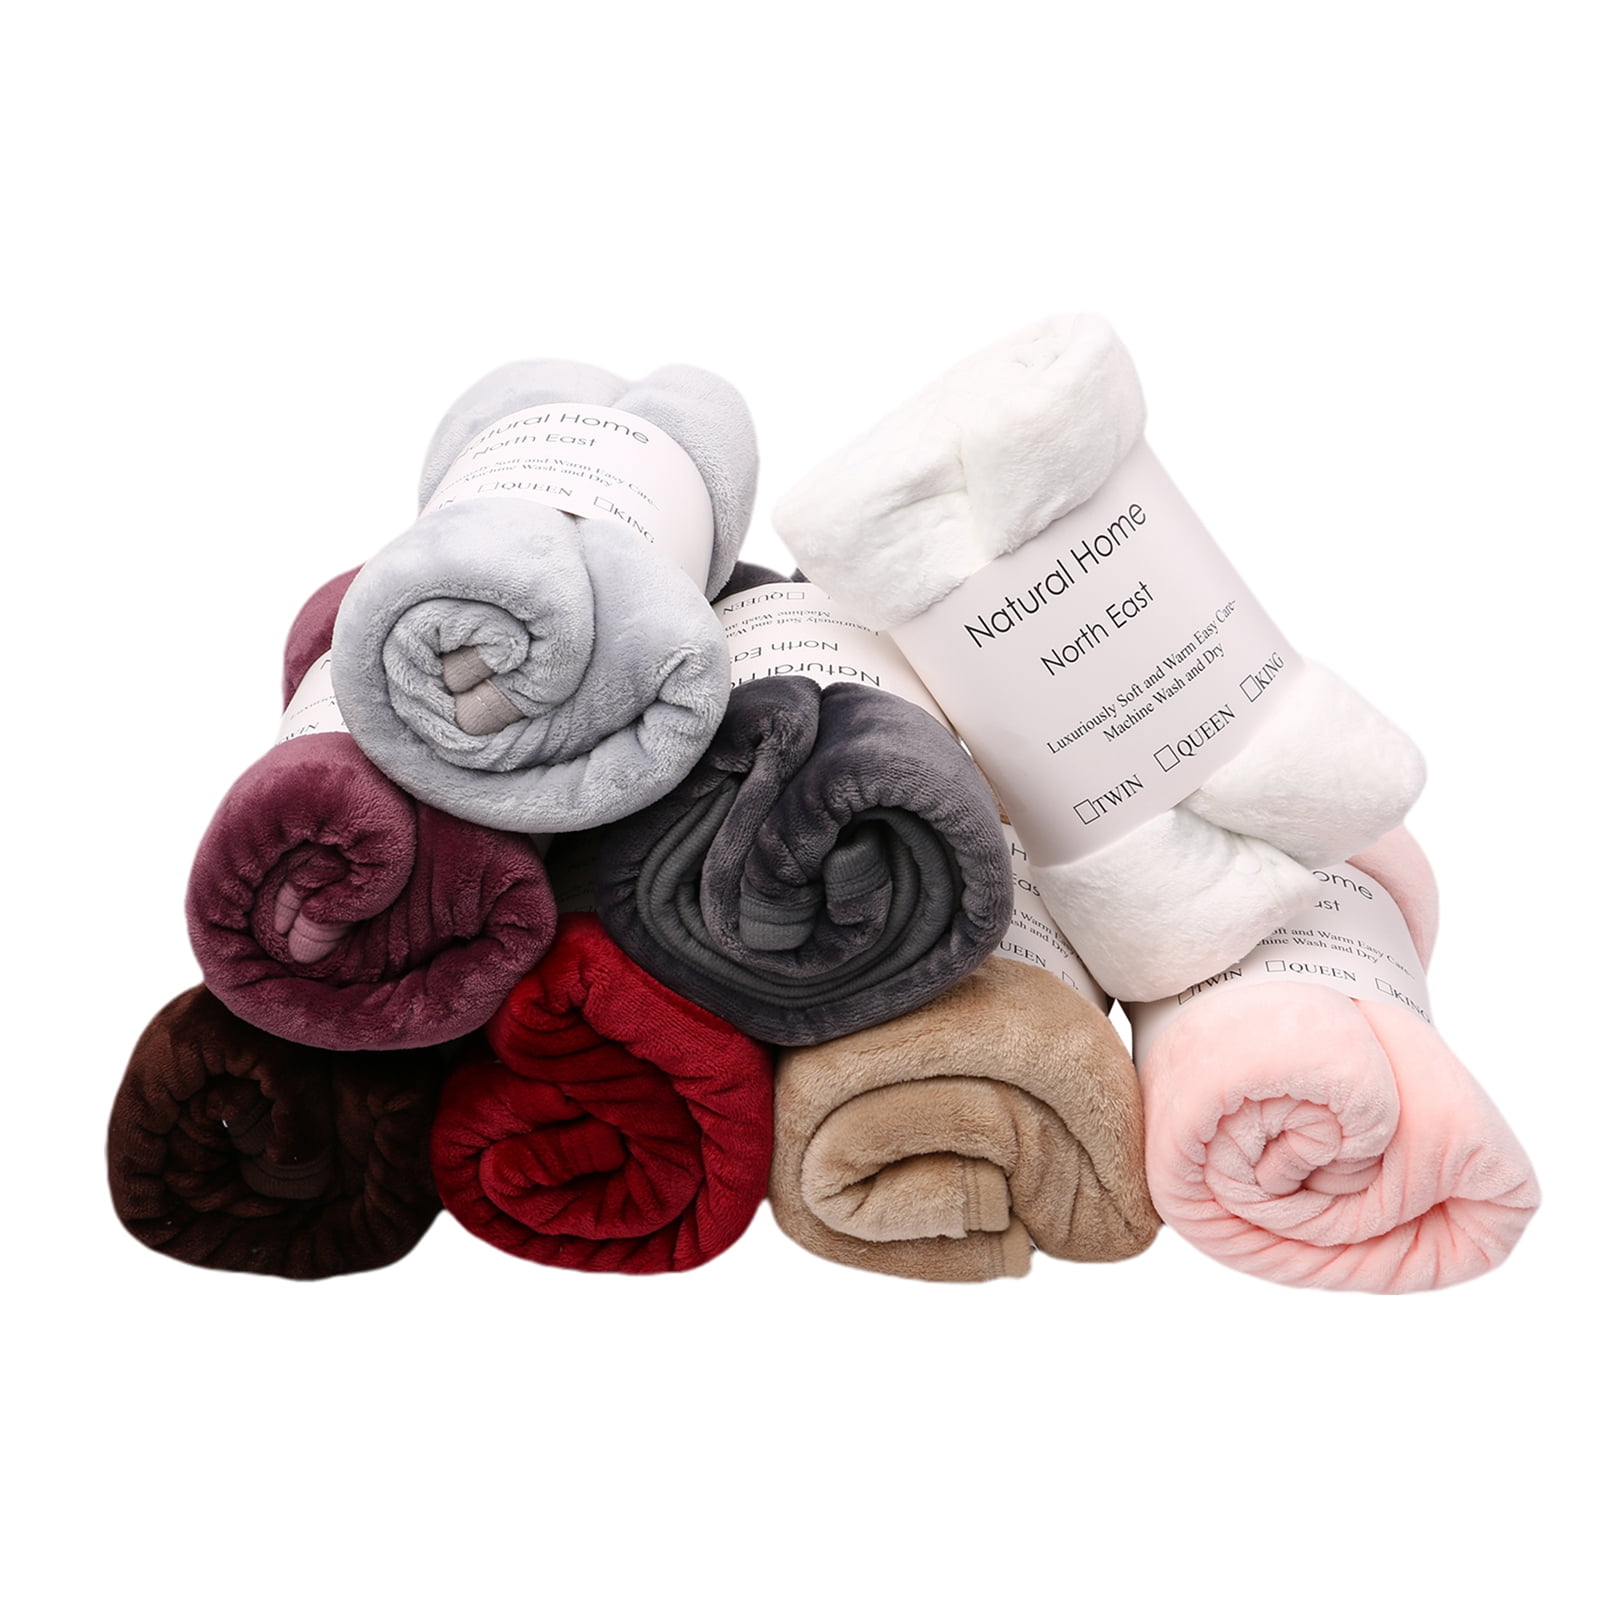 Details about   Hot Comfortable Keep Warm Soft Thick  Giant Yarn Knitted Blanket Handmade Manual 